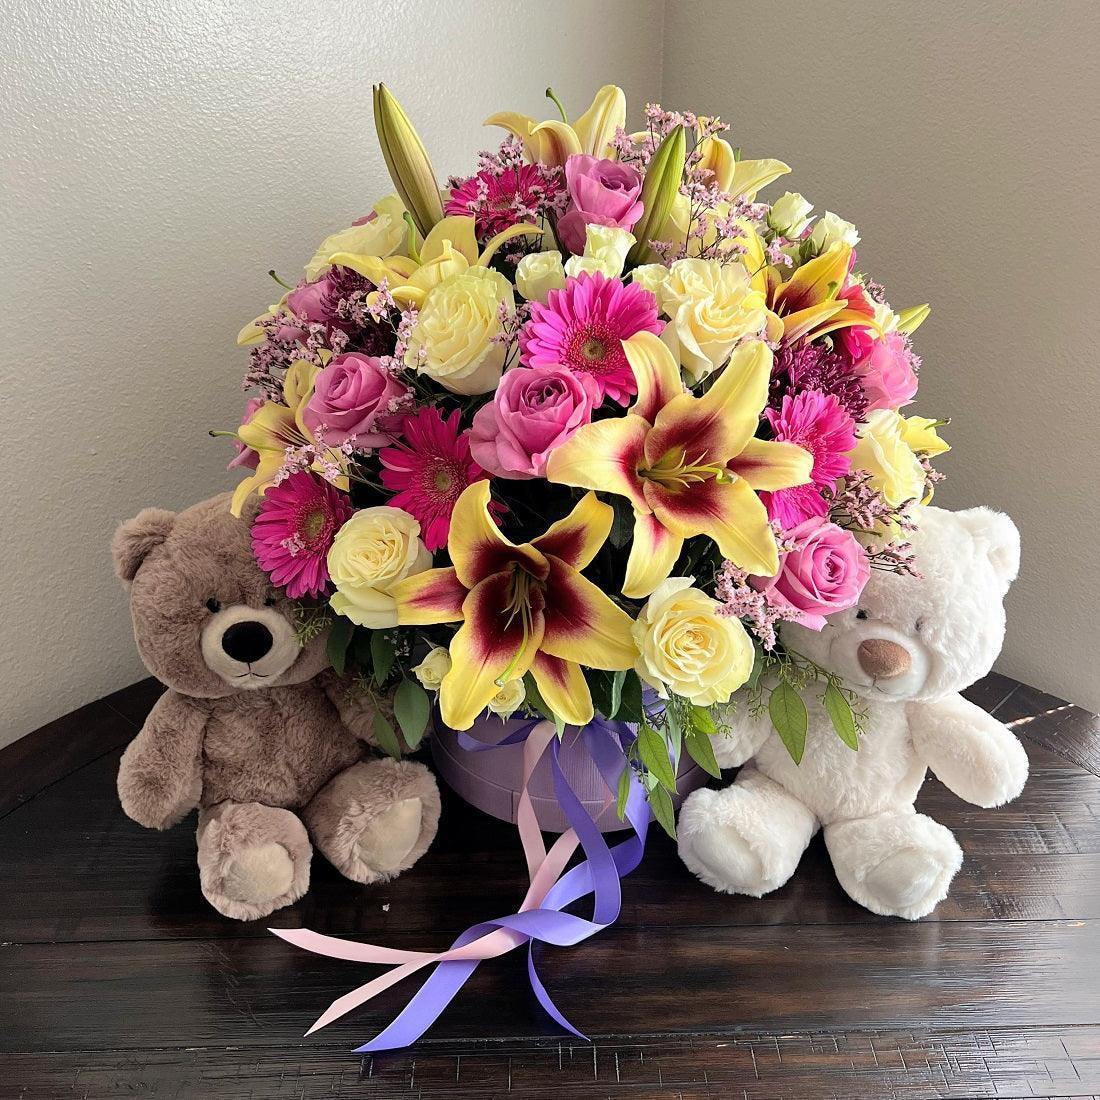 Teddy Bears - Janes Fruits and Flowers